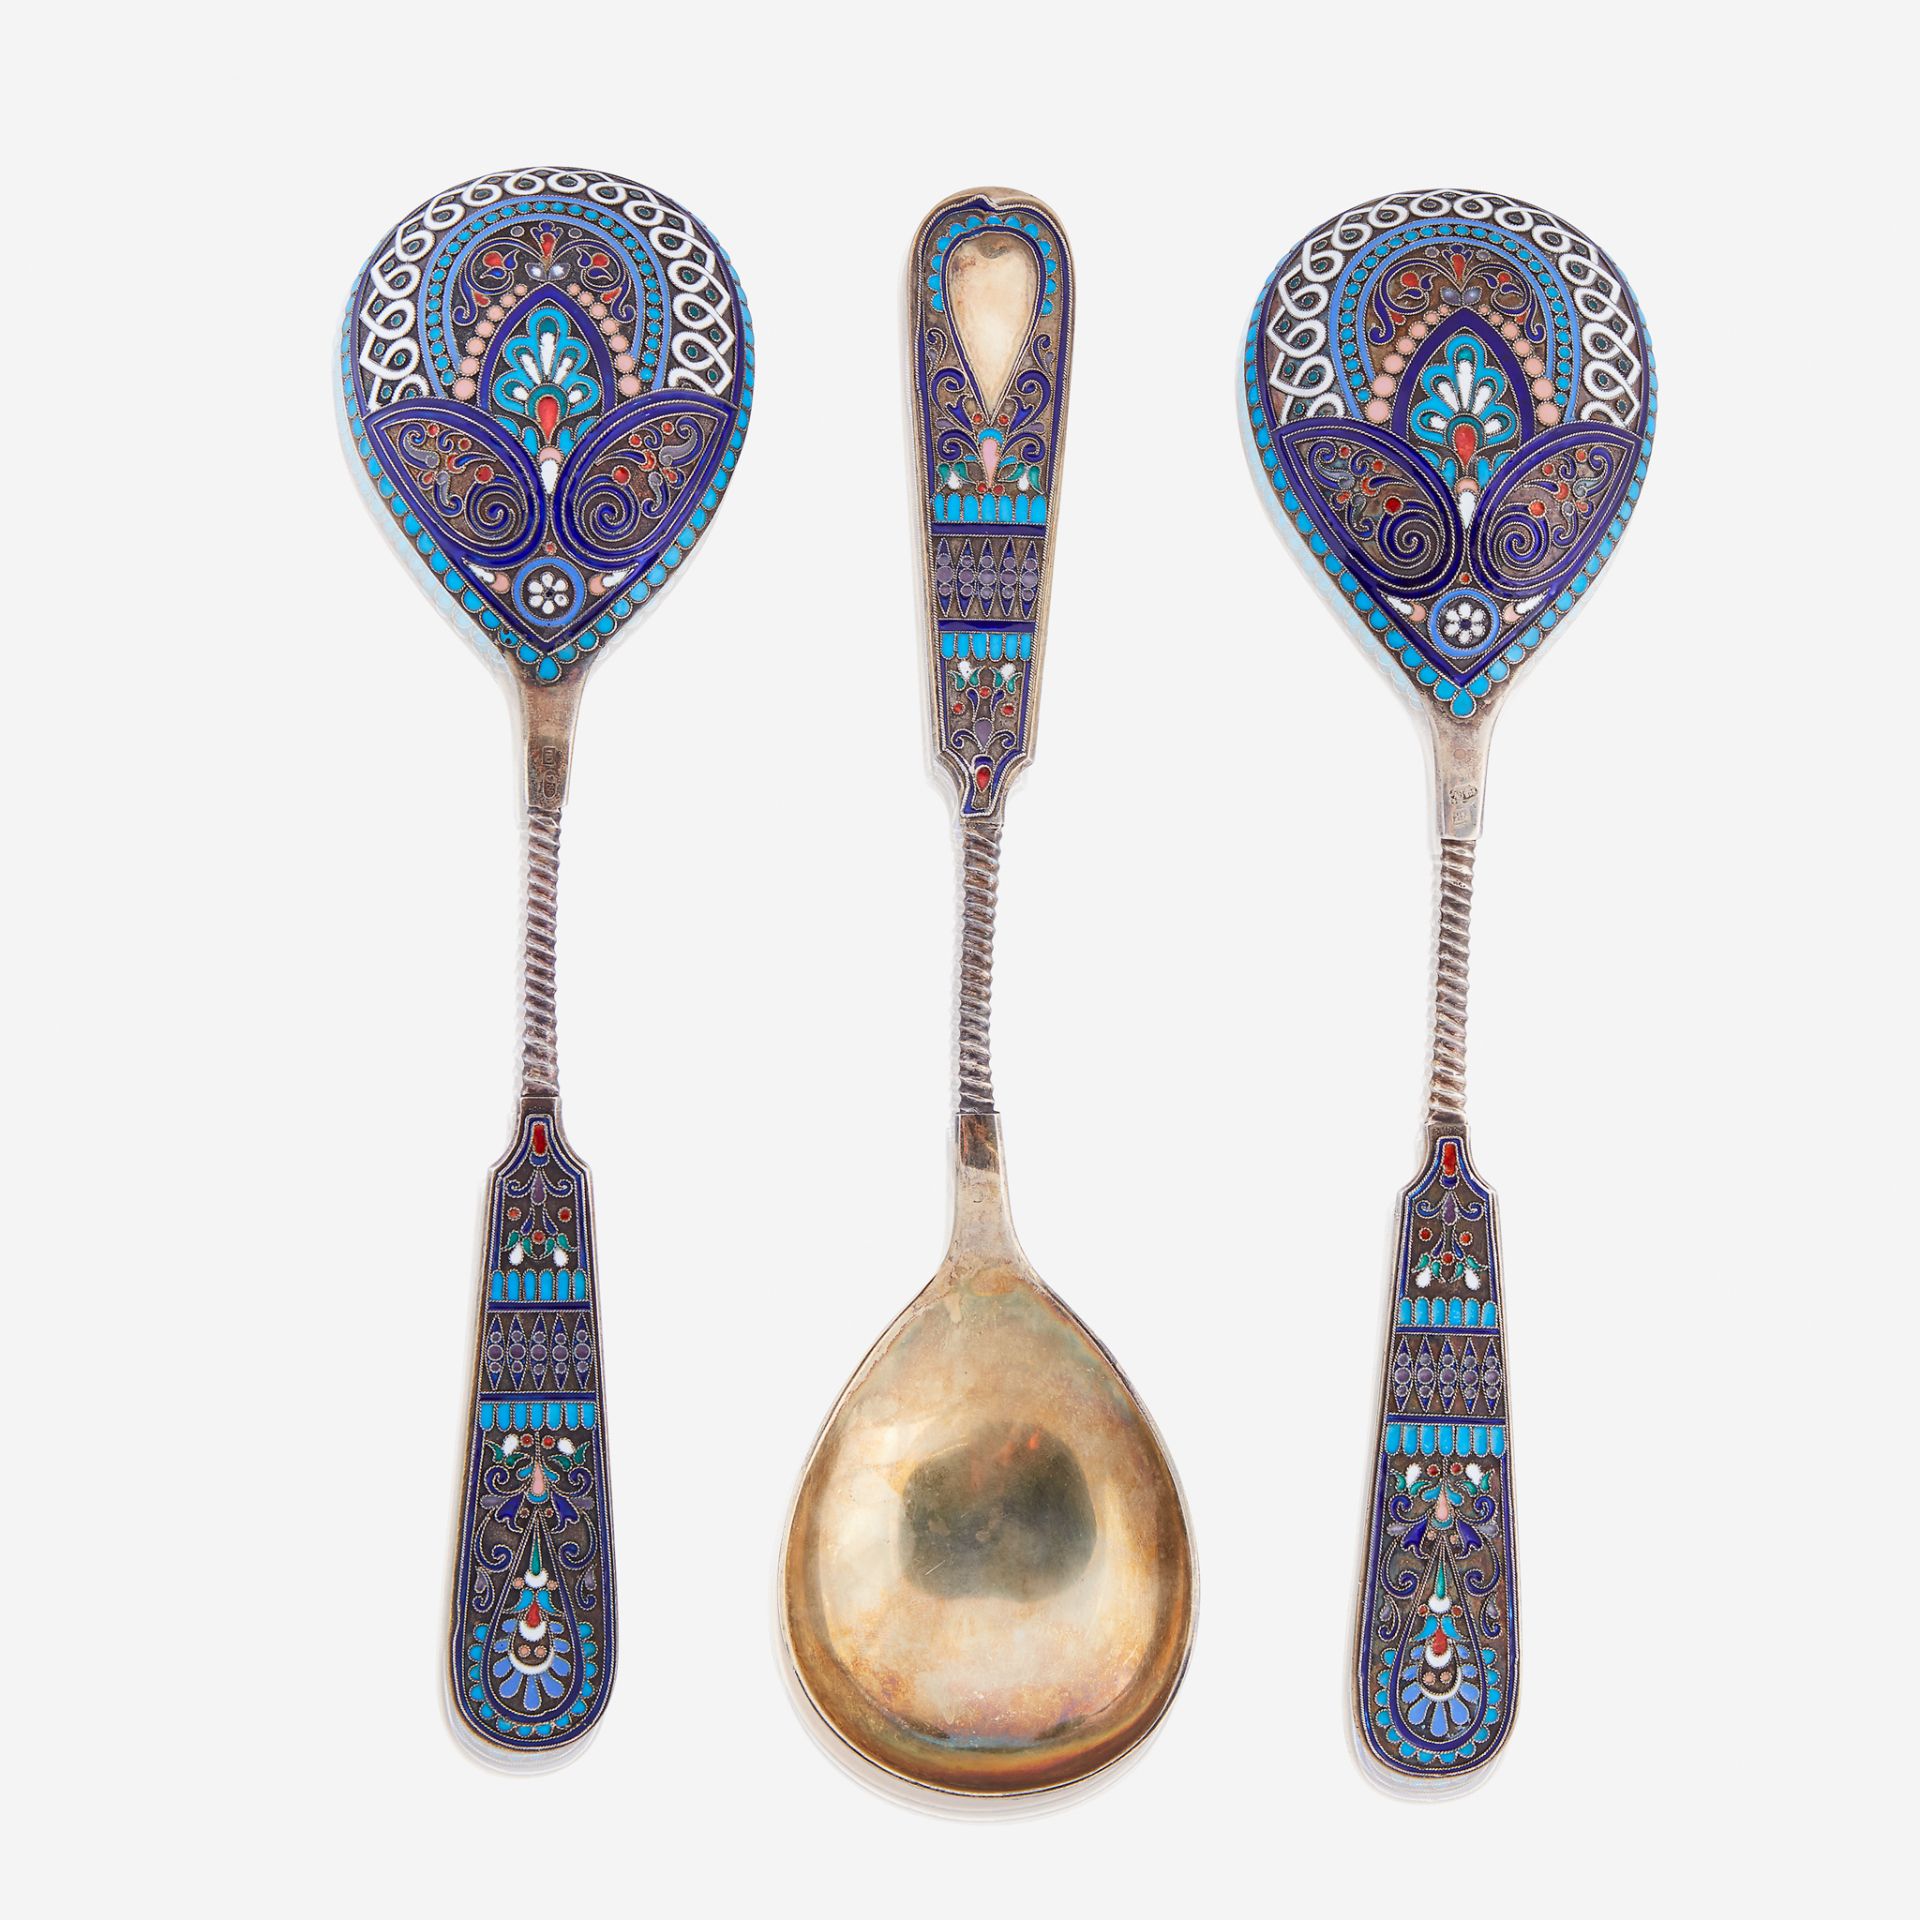 Three large Russian silver-gilt and cloisonné enamel spoons, Pavel Ovchinnikov, August Hollming, and